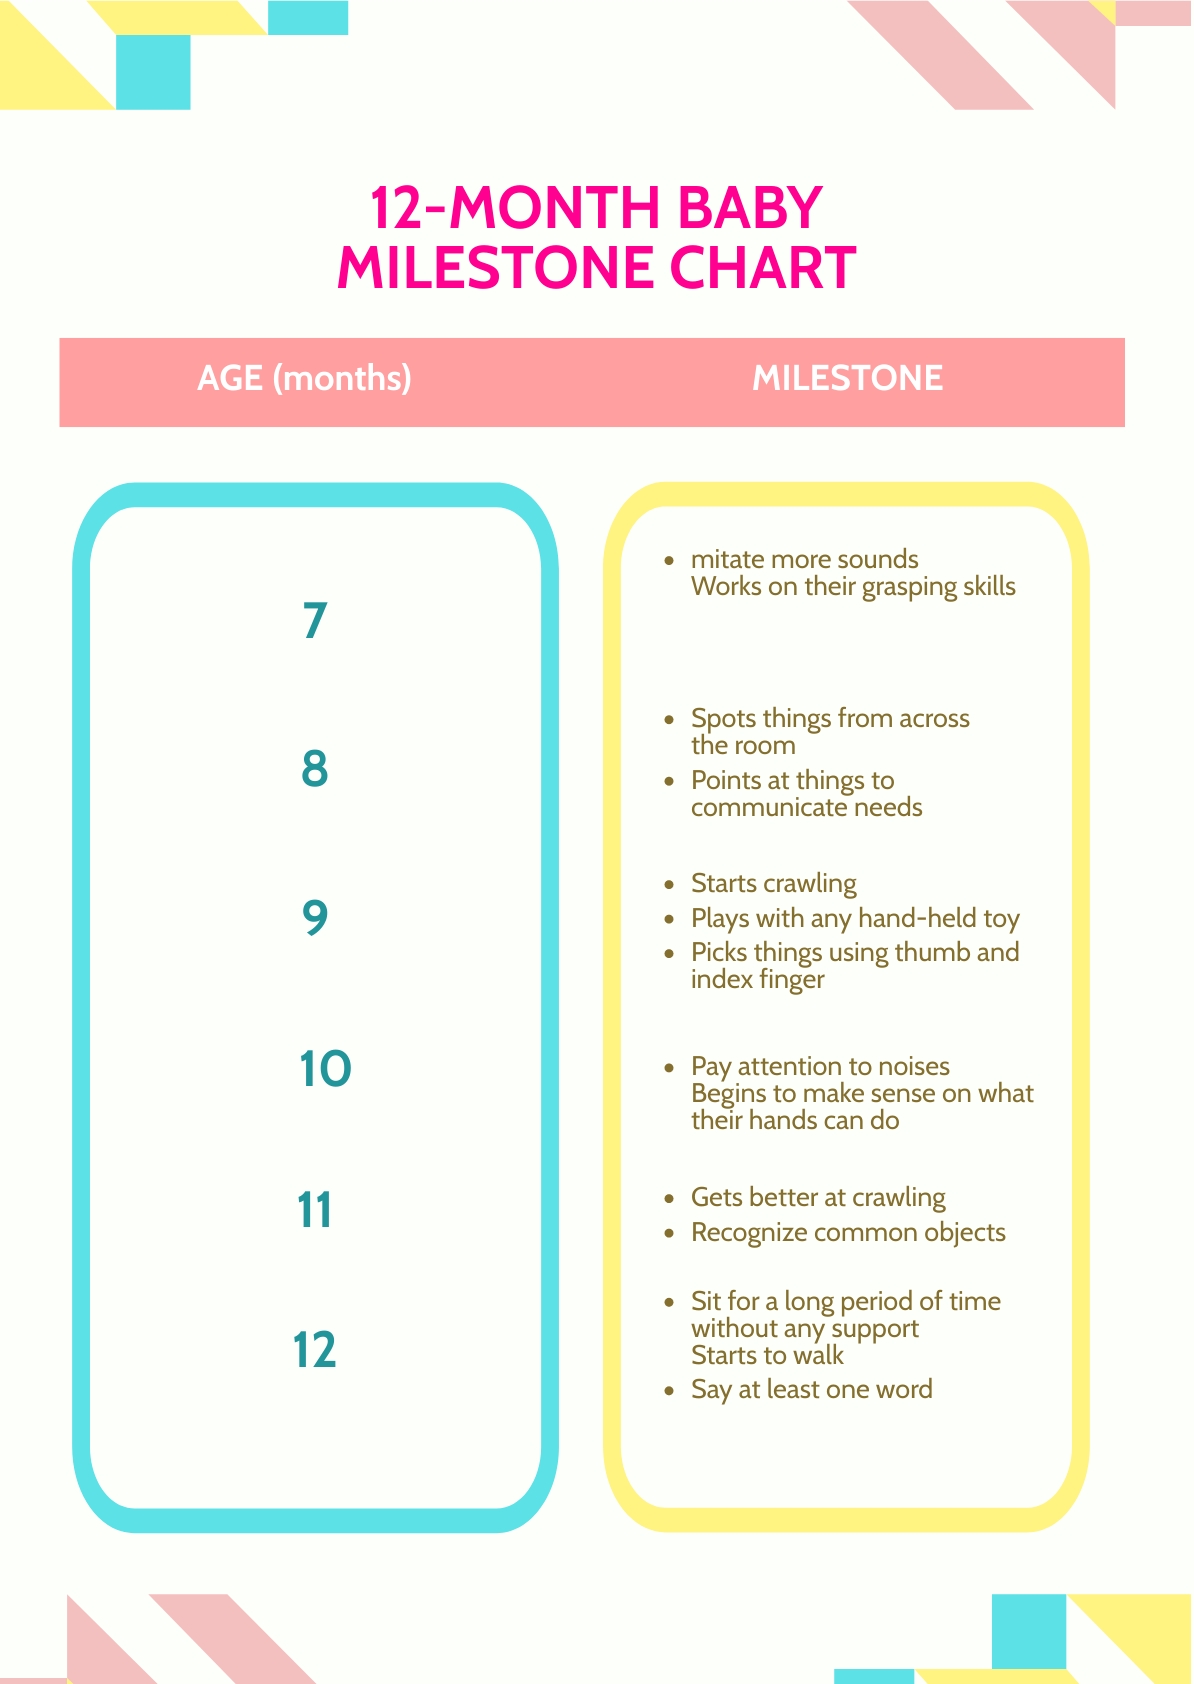 12 Month Baby Milestone Chart in PSD - Download | Template.net